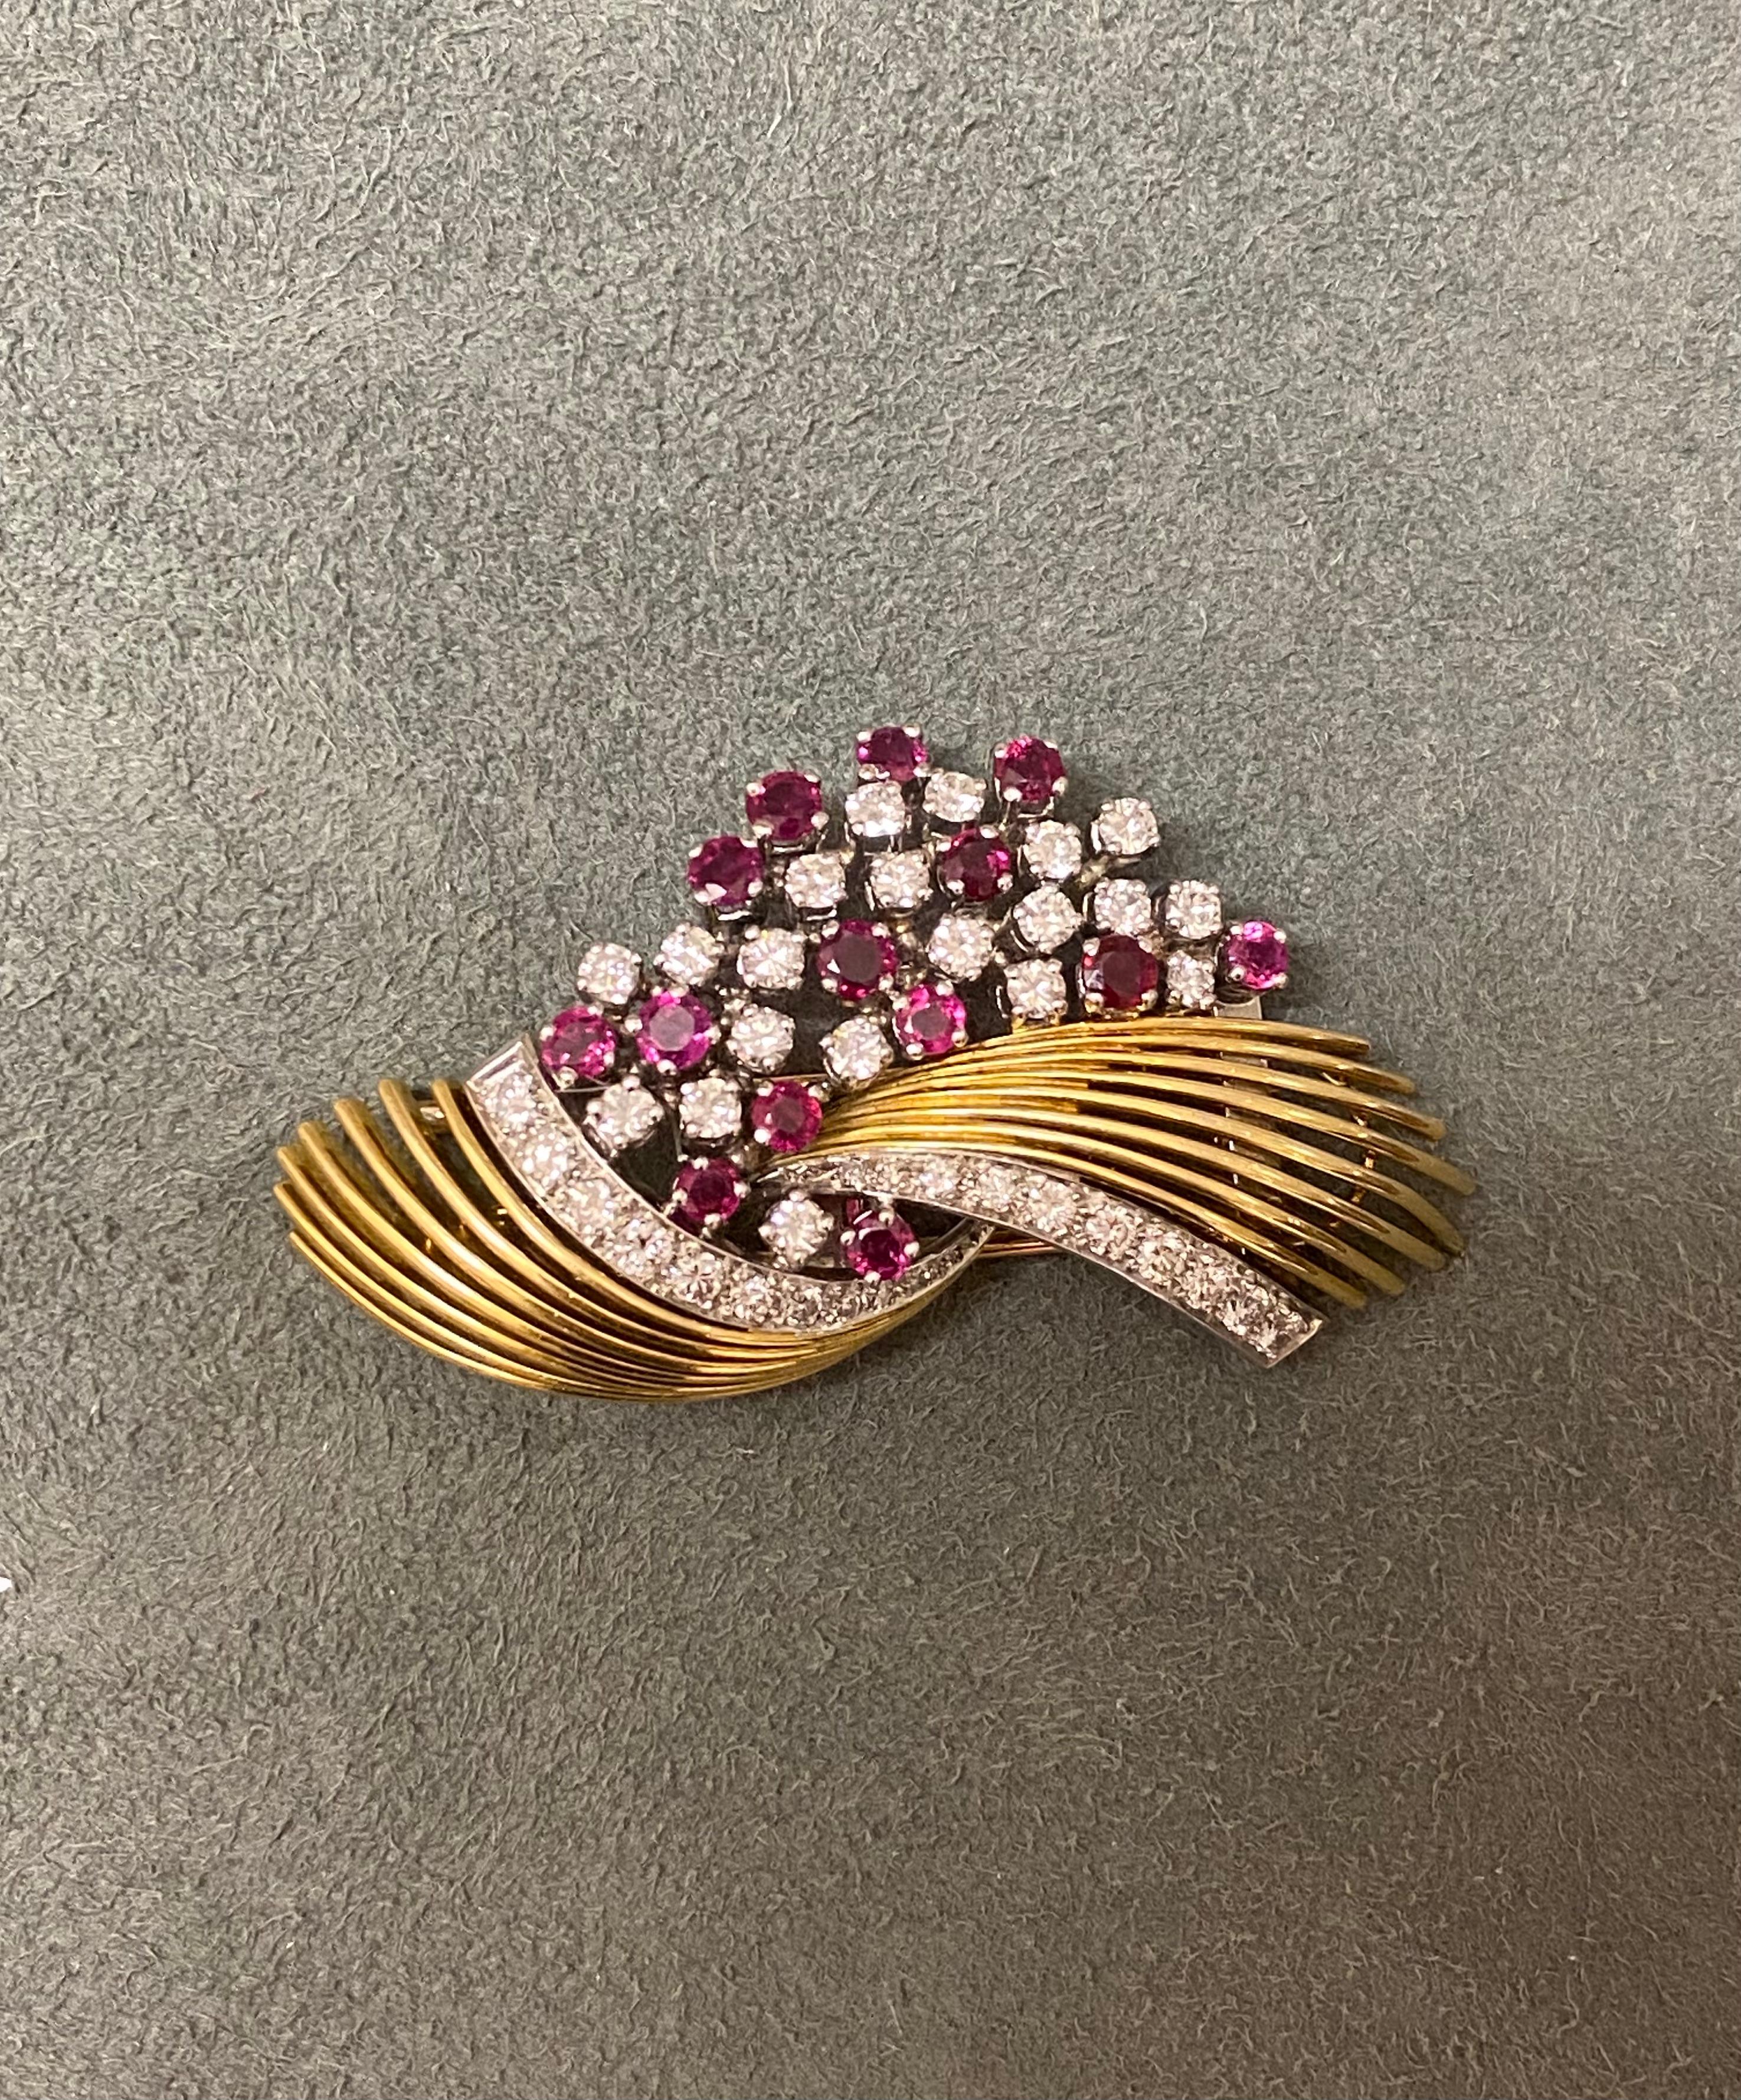 A European vintage brooch in 18k yellow gold set with rubies (NH, 1.16ct total) and diamonds (1.87ct total). 